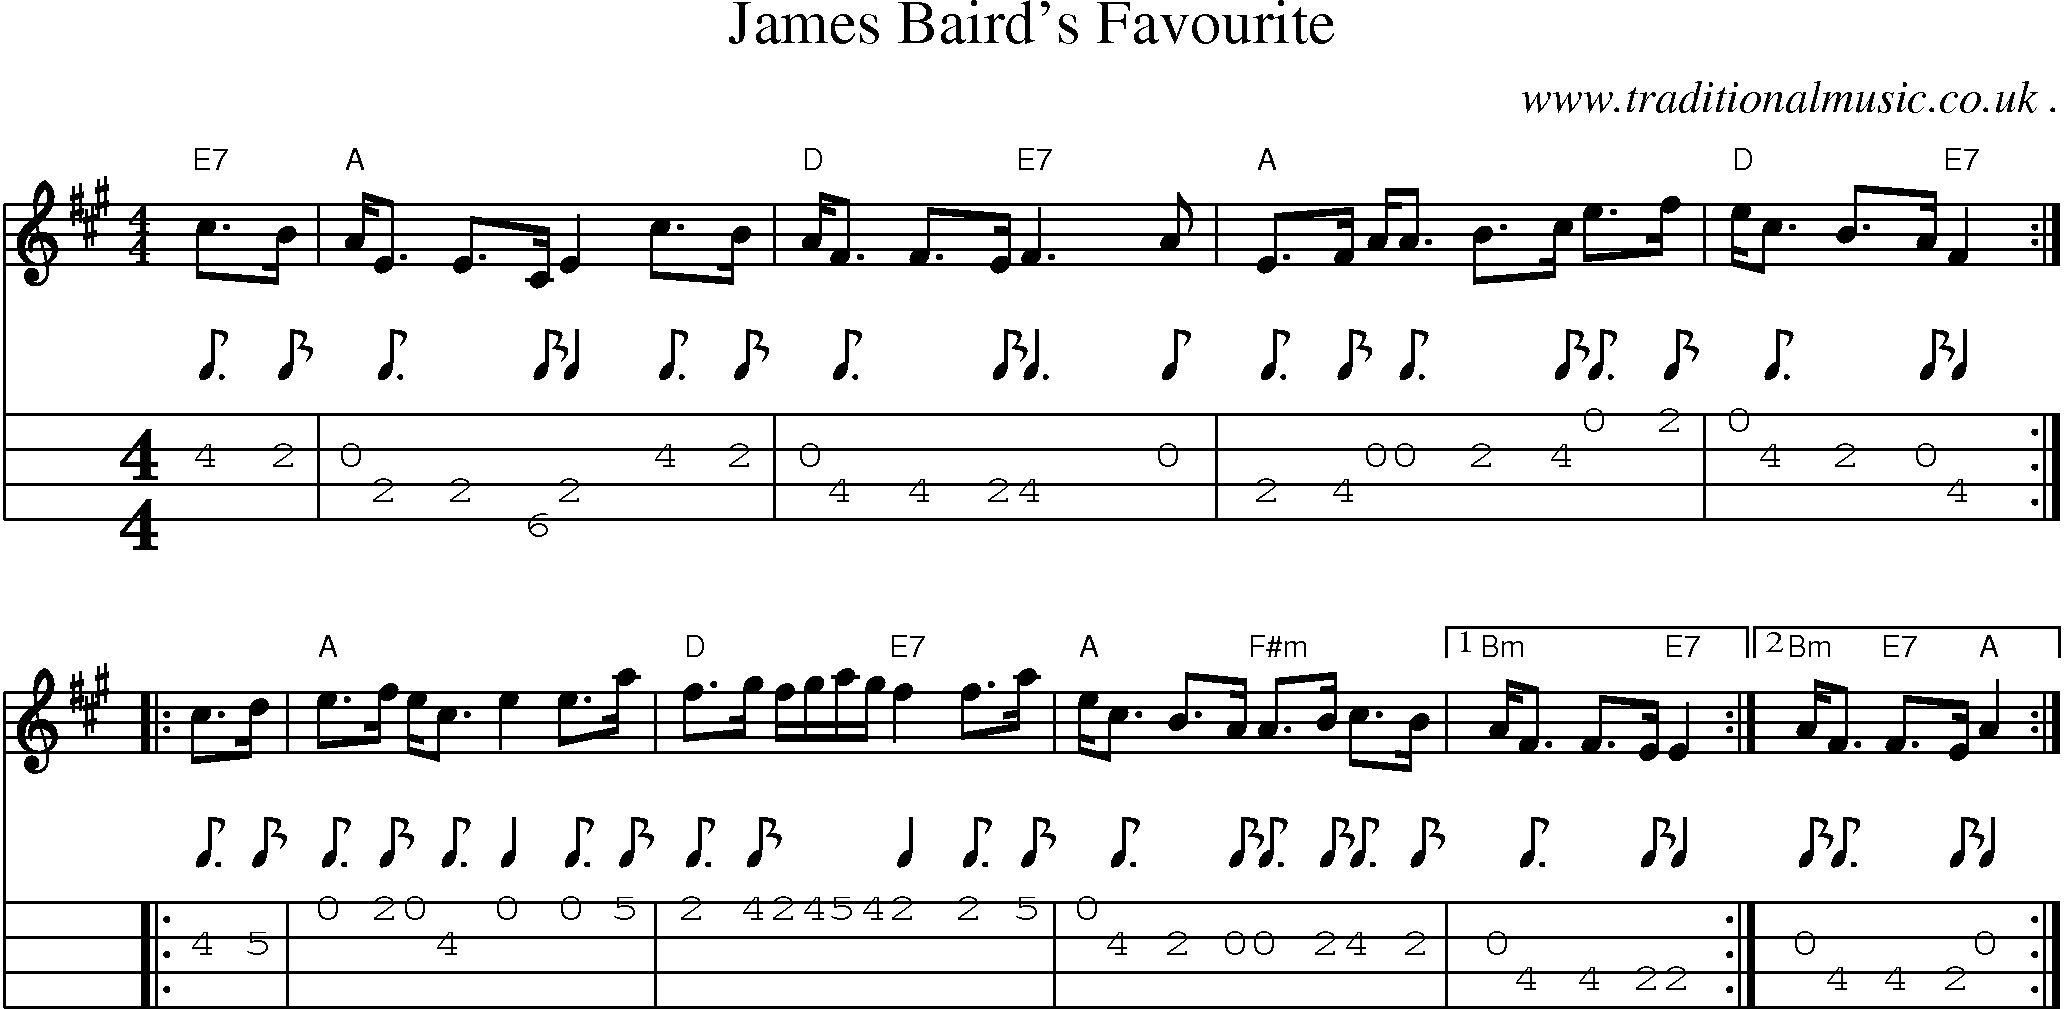 Sheet-music  score, Chords and Mandolin Tabs for James Bairds Favourite